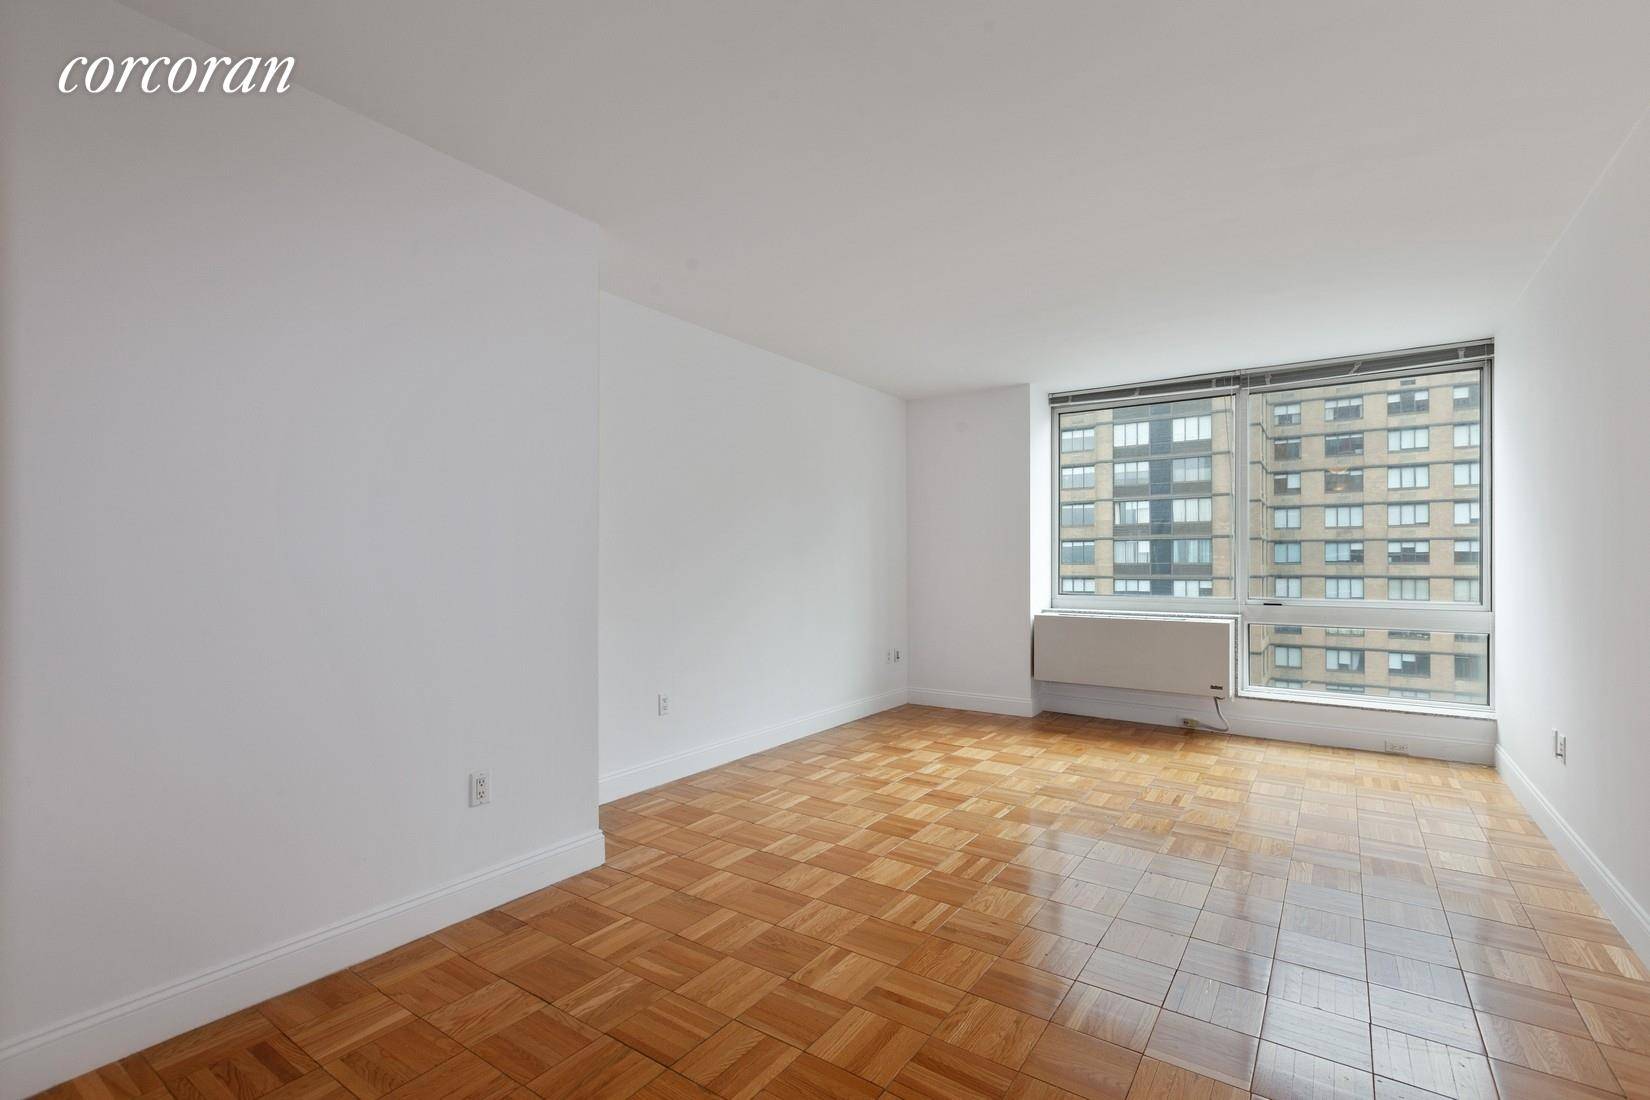 Perfectly proportioned one bedroom home in one of the Upper East Side's most amenity filled buildings, One Carnegie Hill.